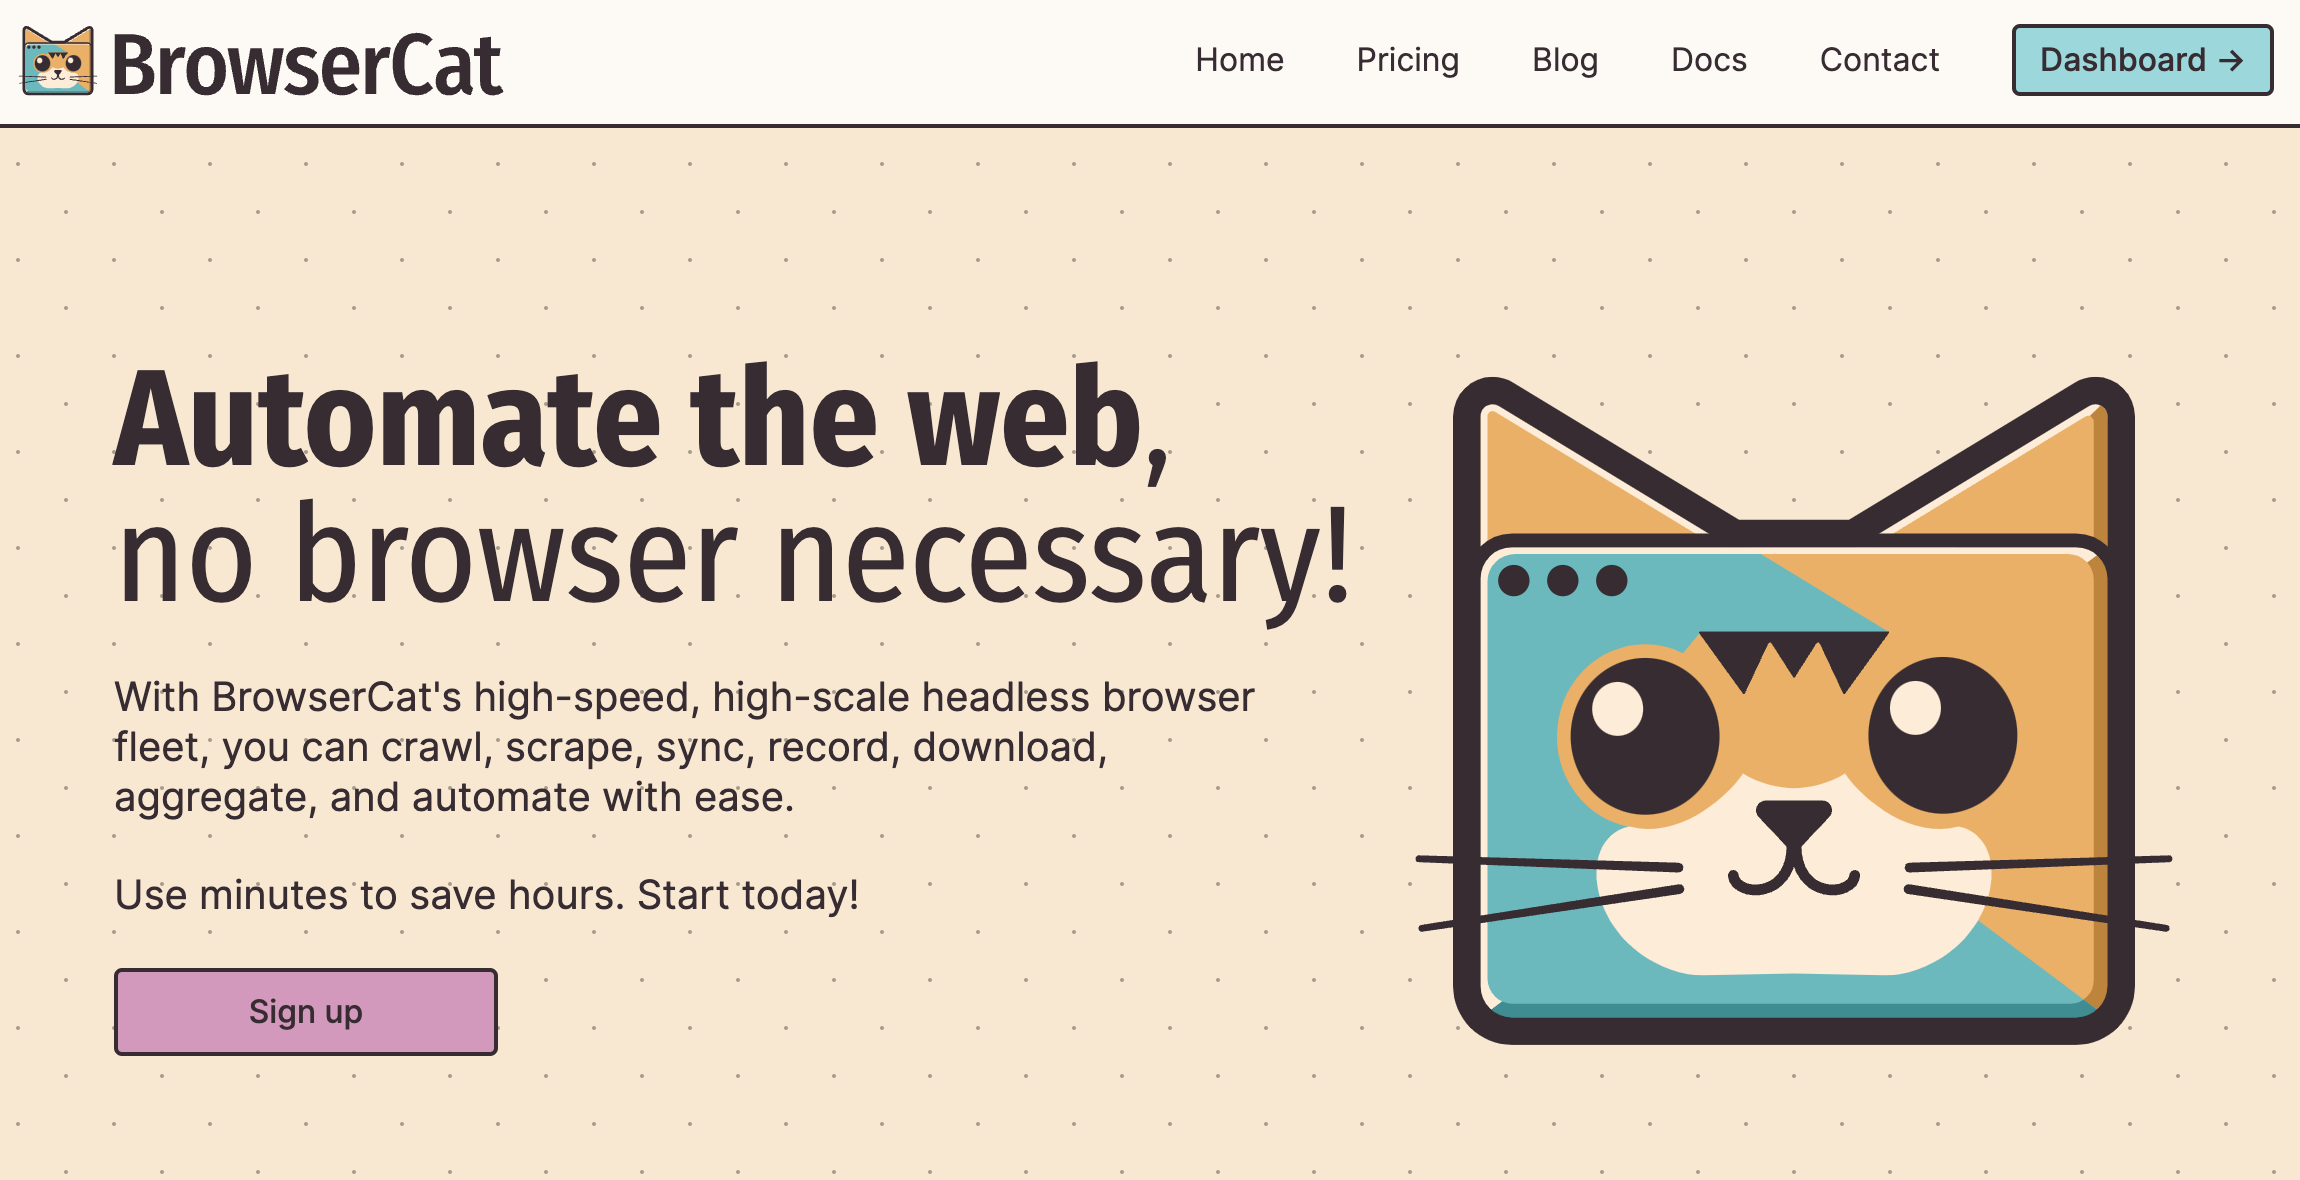 BrowserCat Home Page